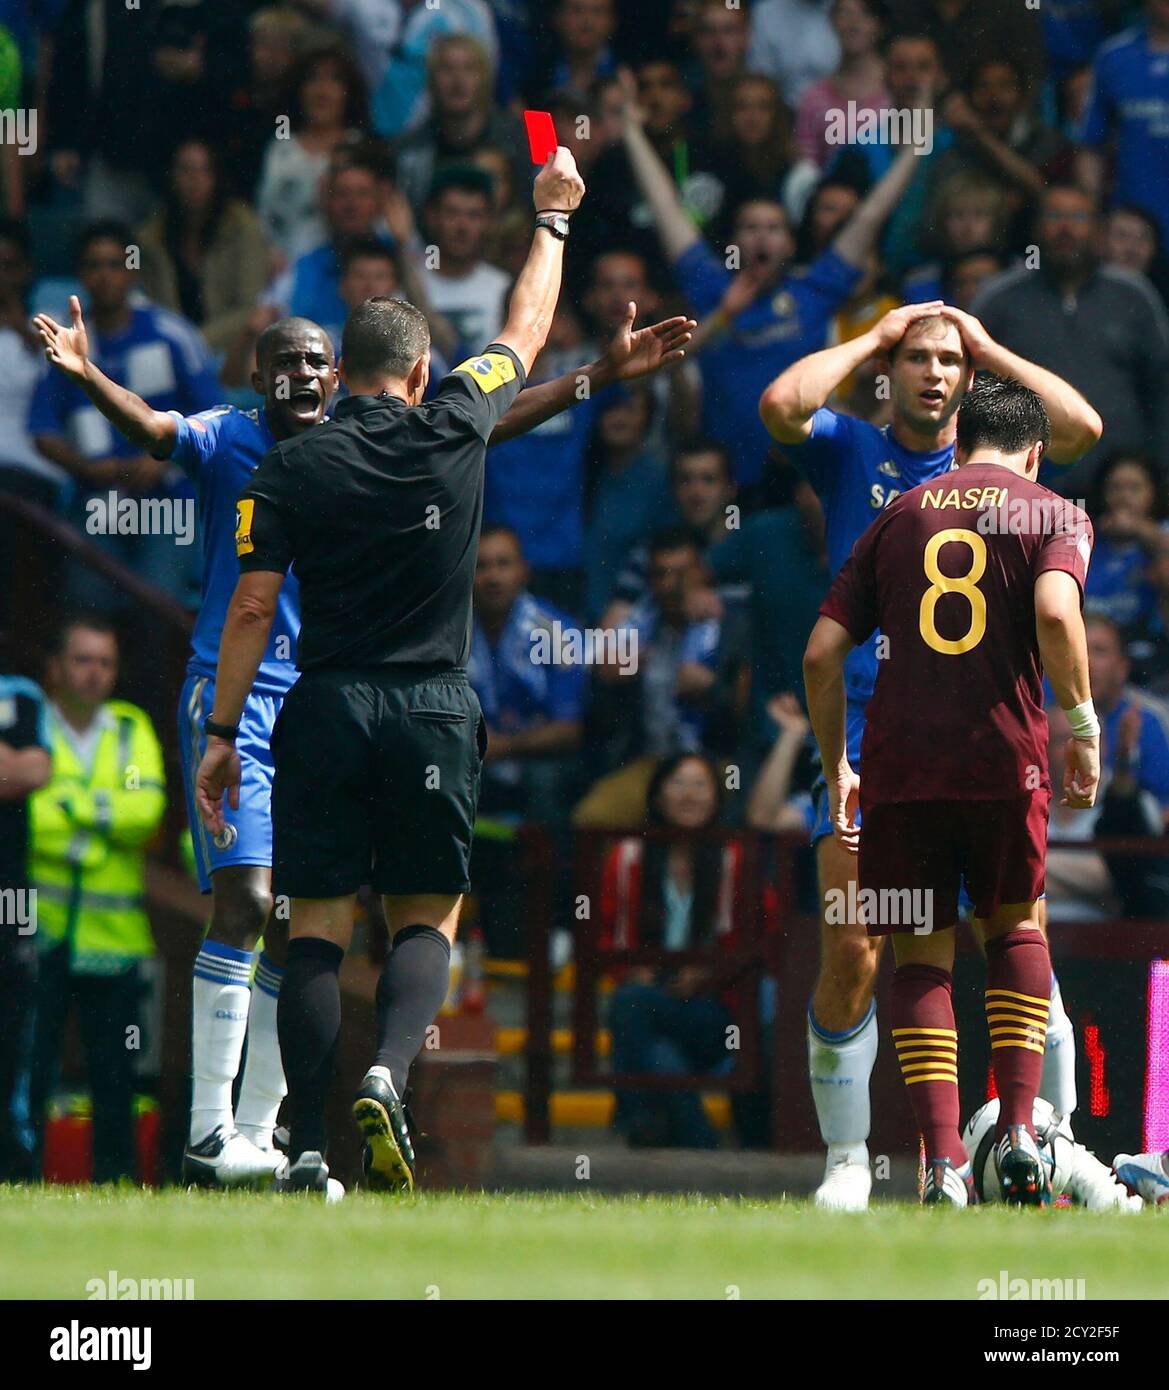 Chelsea's Branislav Ivanovic (2nd R) holds his head after being shown a red card by referee Kevin Friend during their Community Shield soccer match against Manchester City at Villa Park in Birmingham, central England August 12, 2012.    REUTERS/Eddie Keogh (BRITAIN - Tags: SPORT SOCCER) Stock Photo